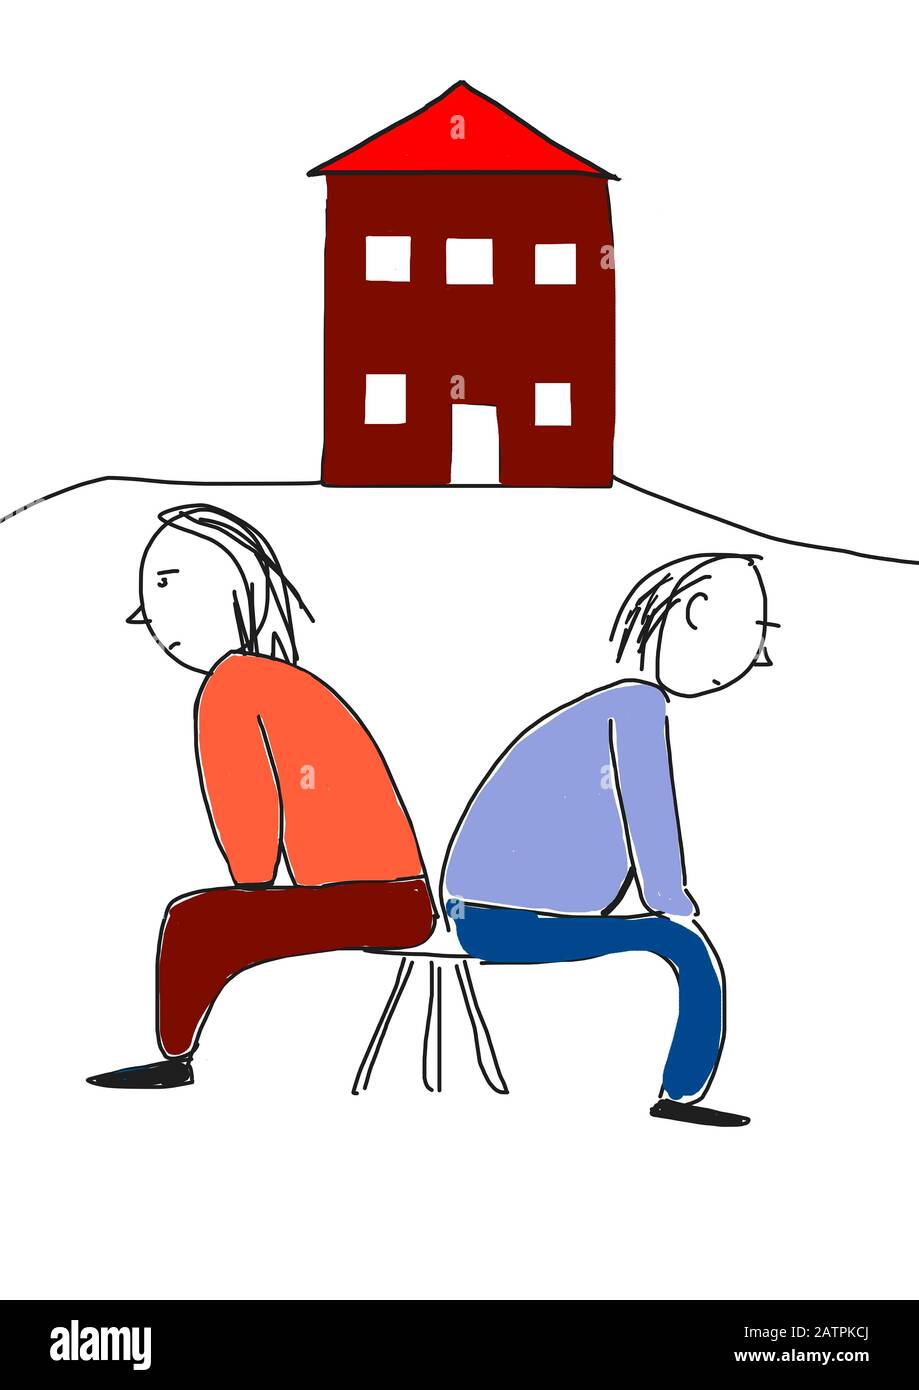 Naive illustration, children's drawing, dispute between two adults, Germany Stock Photo